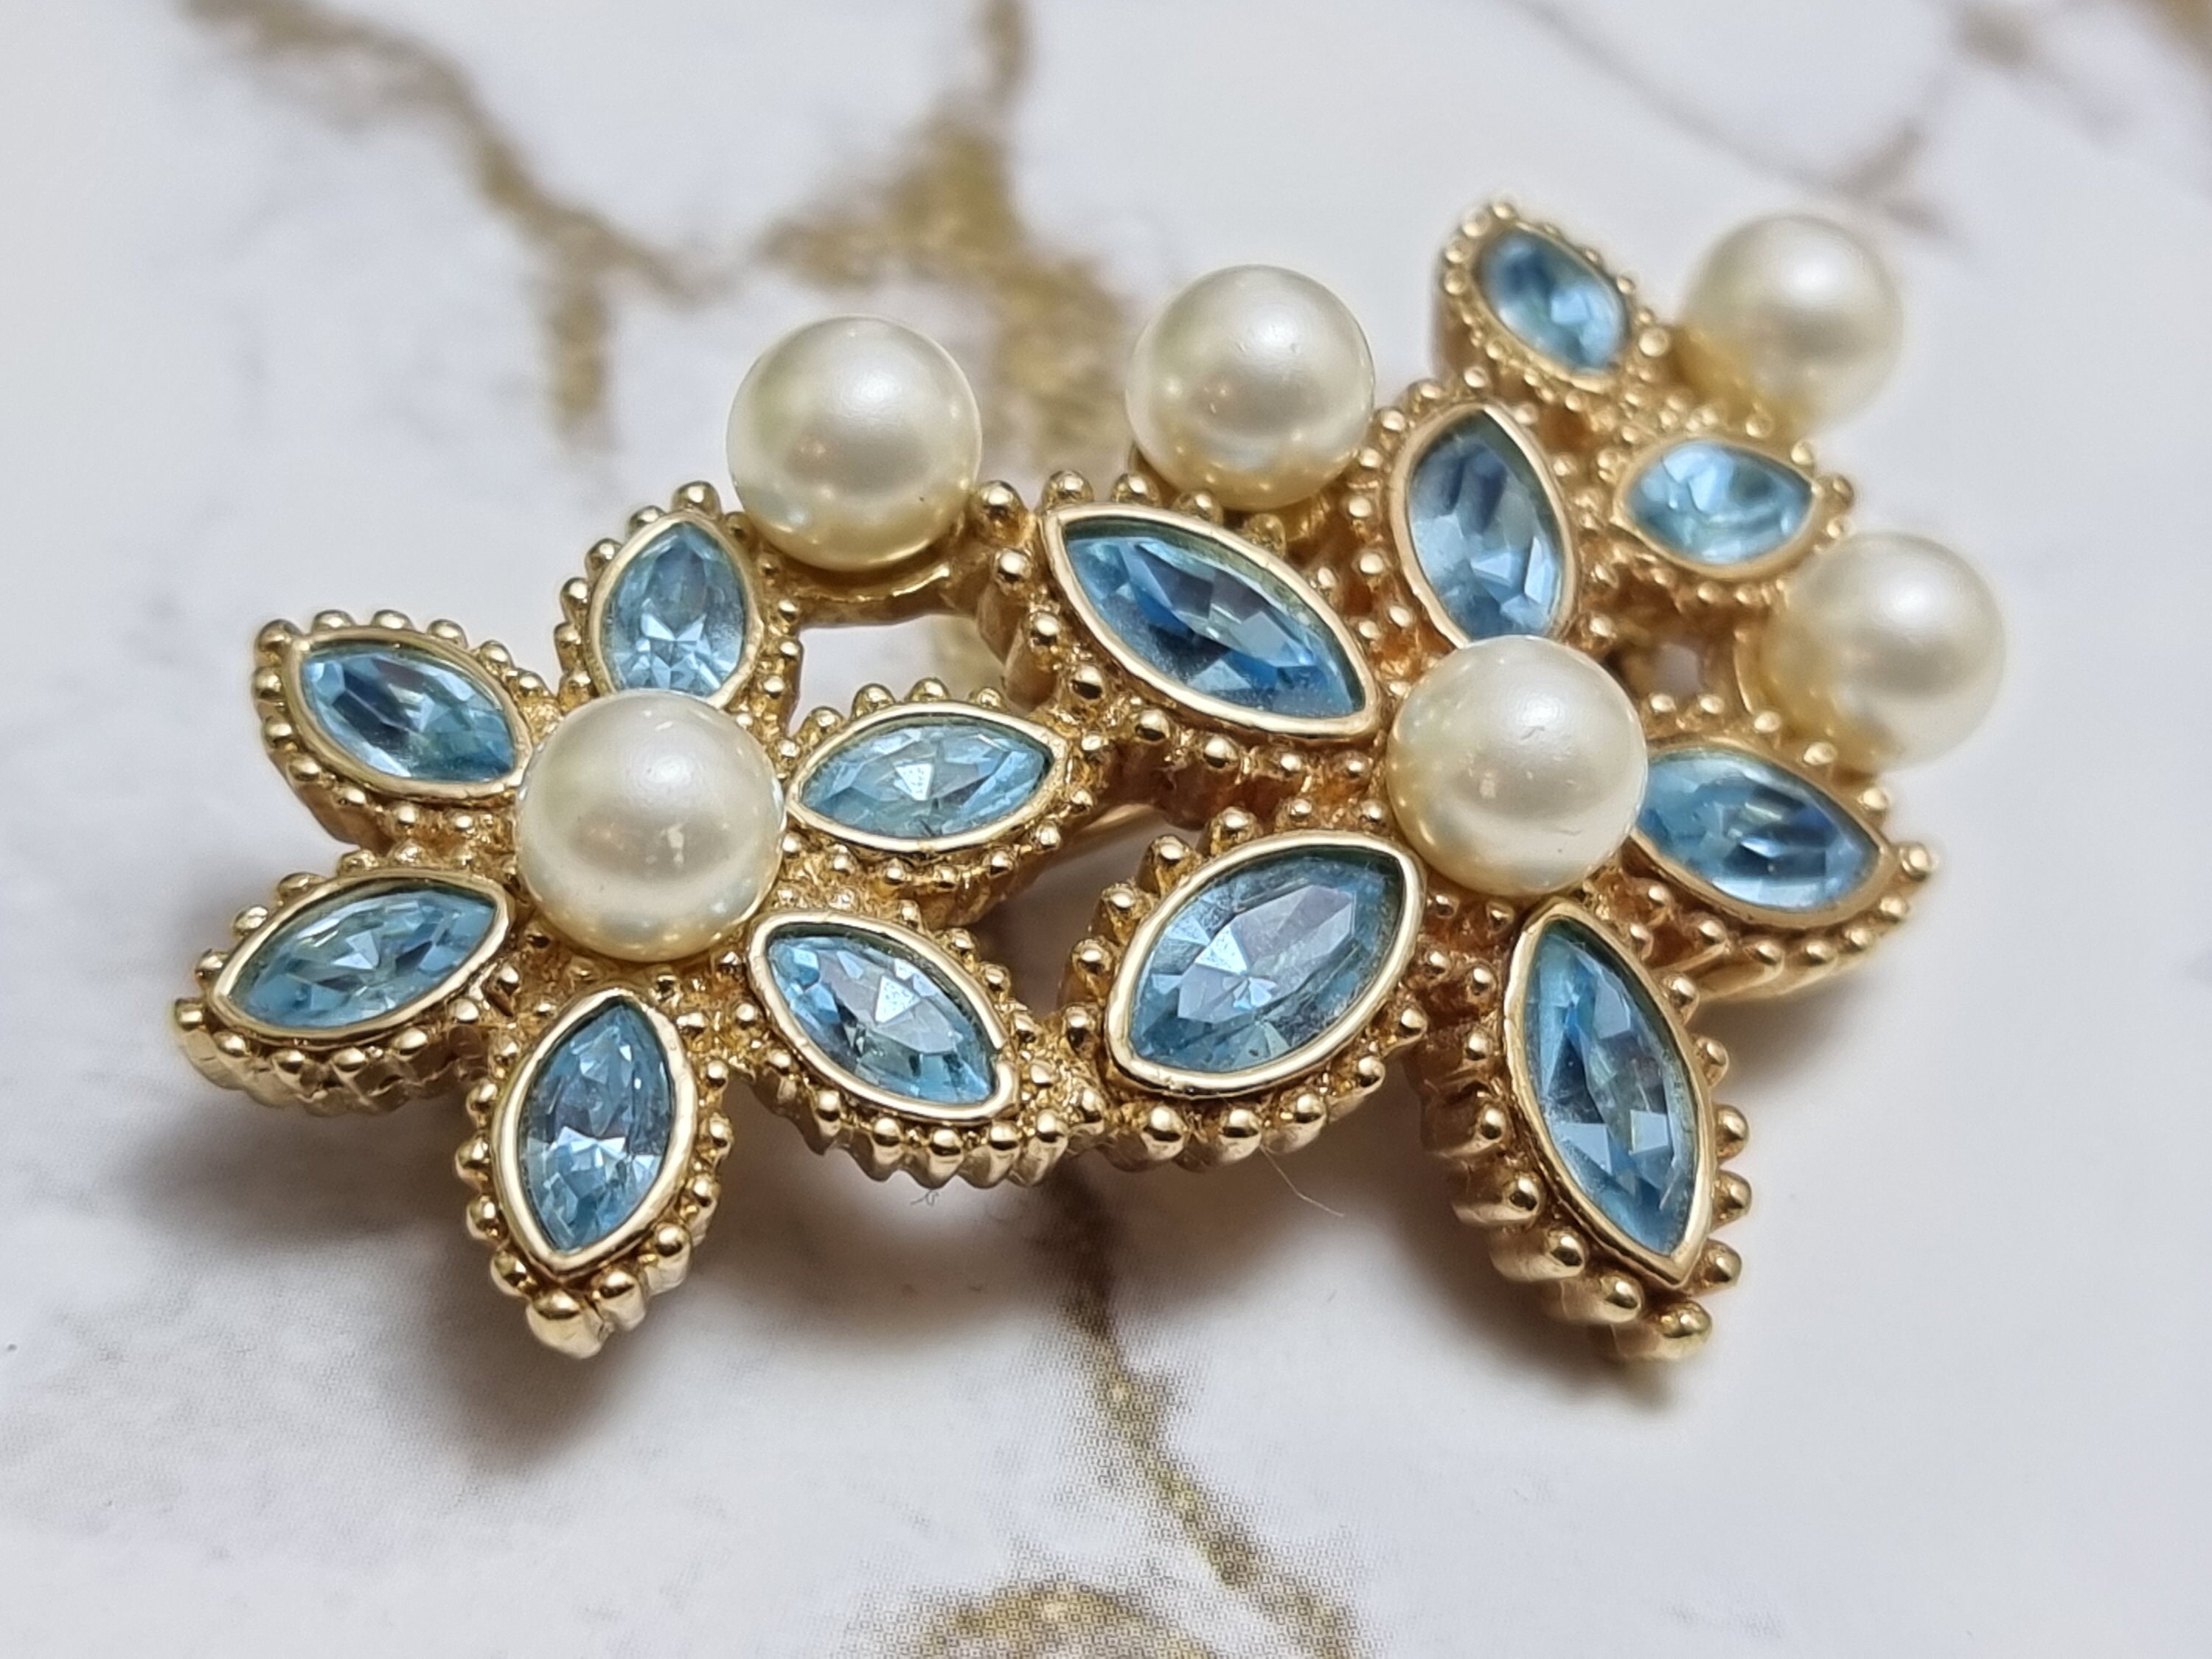 Shop Christian Dior Costume Jewelry Brooches & Corsages (V0693CDNRS_D301)  by naganon